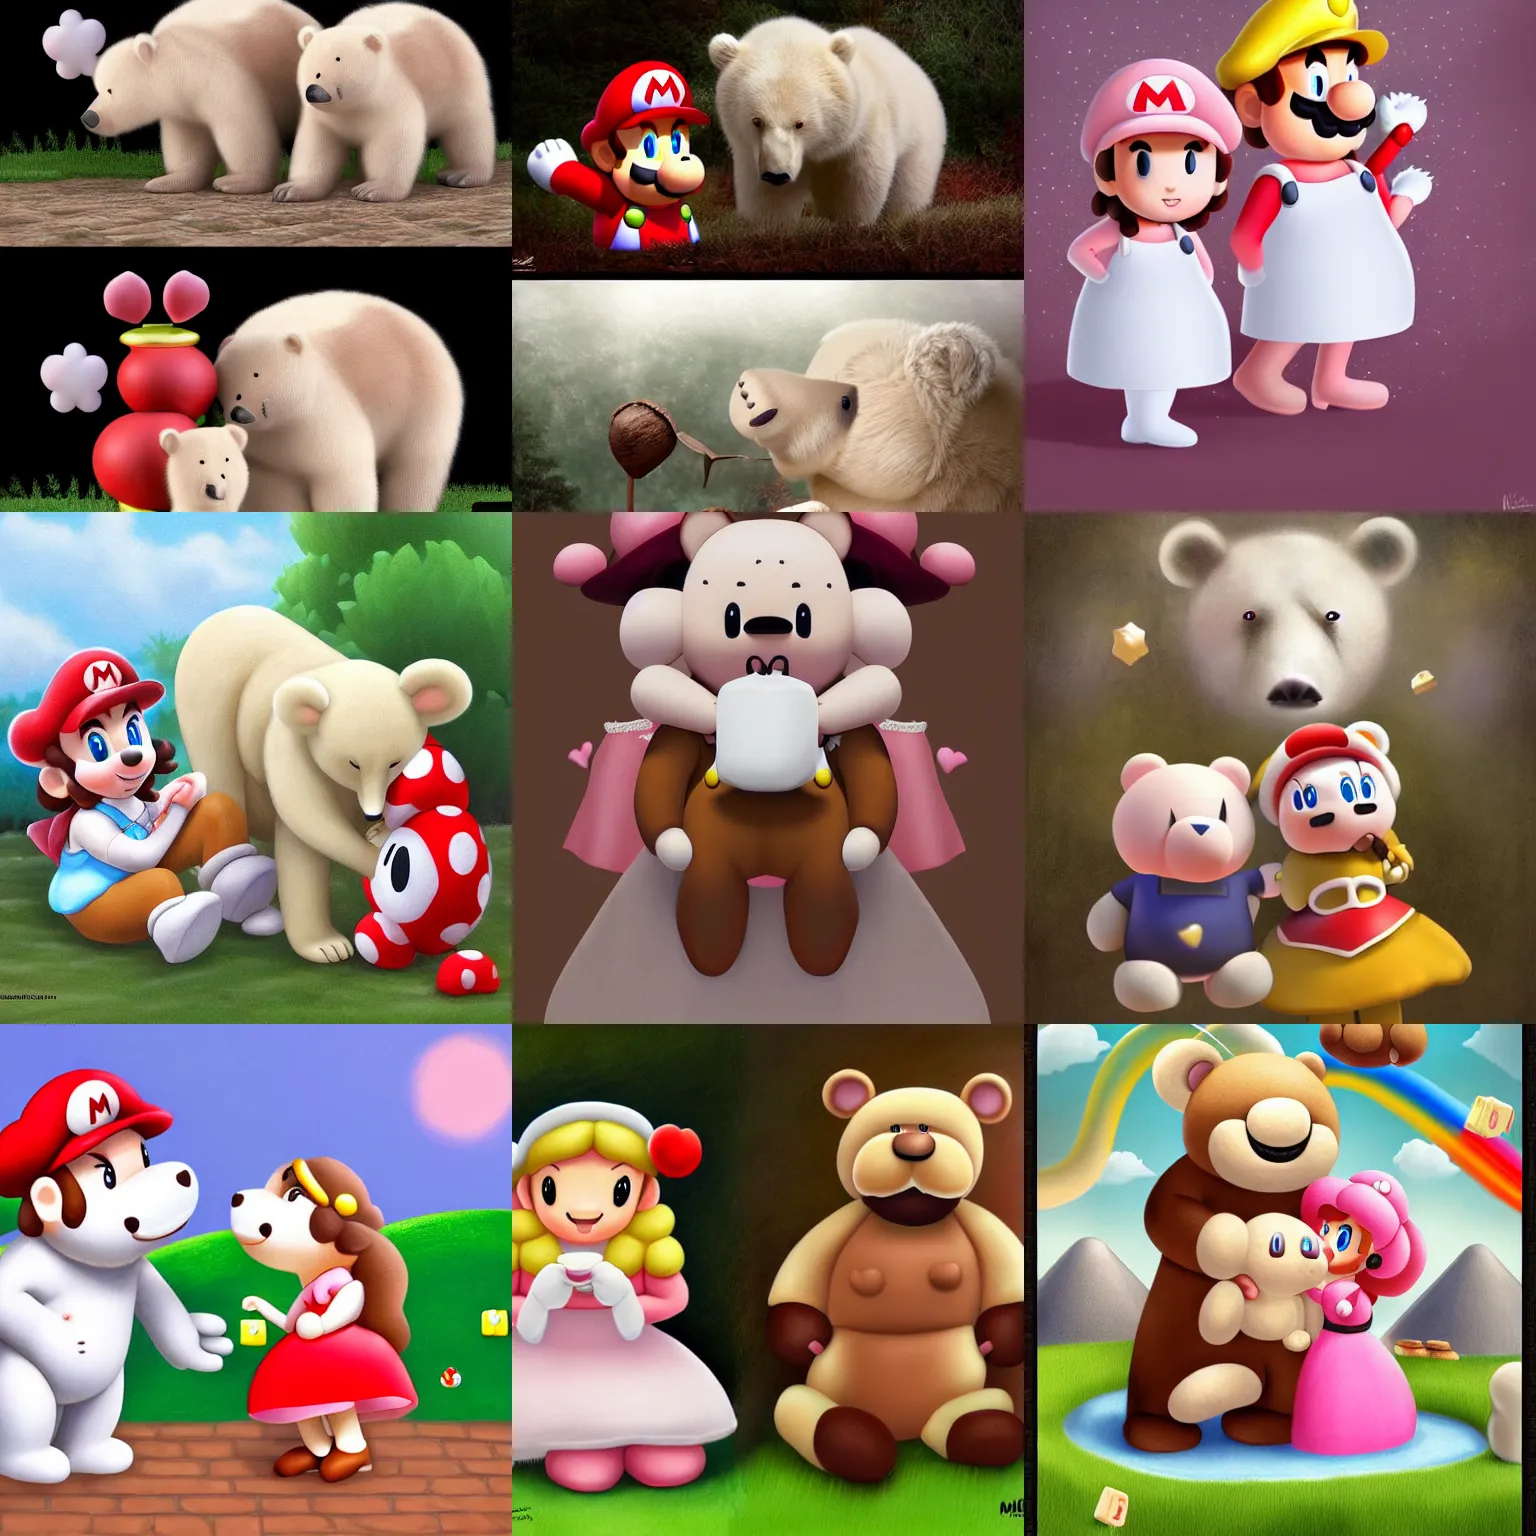 Prompt: milk & mocha bear as mario and princess peach by melani sie, milk is a white bear and mocha is a brown bear, cute and adorable, matte painting